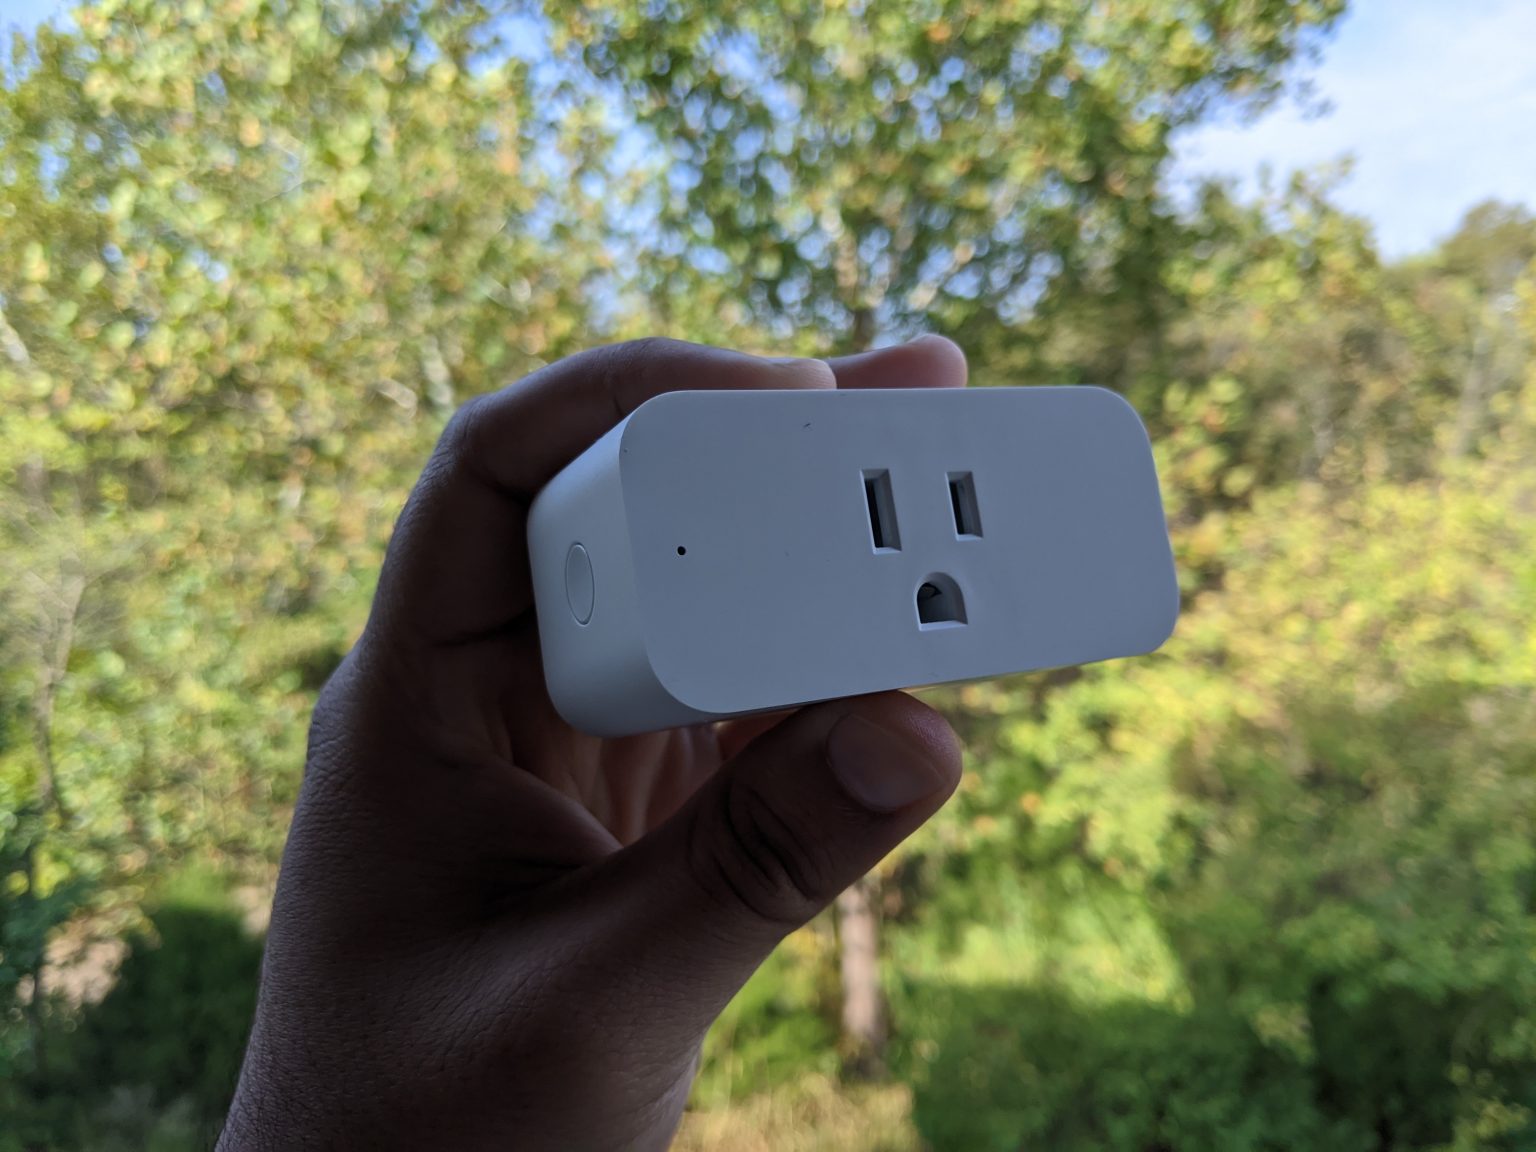 How To Schedule Amazon Smart Plug To Turn On And Off